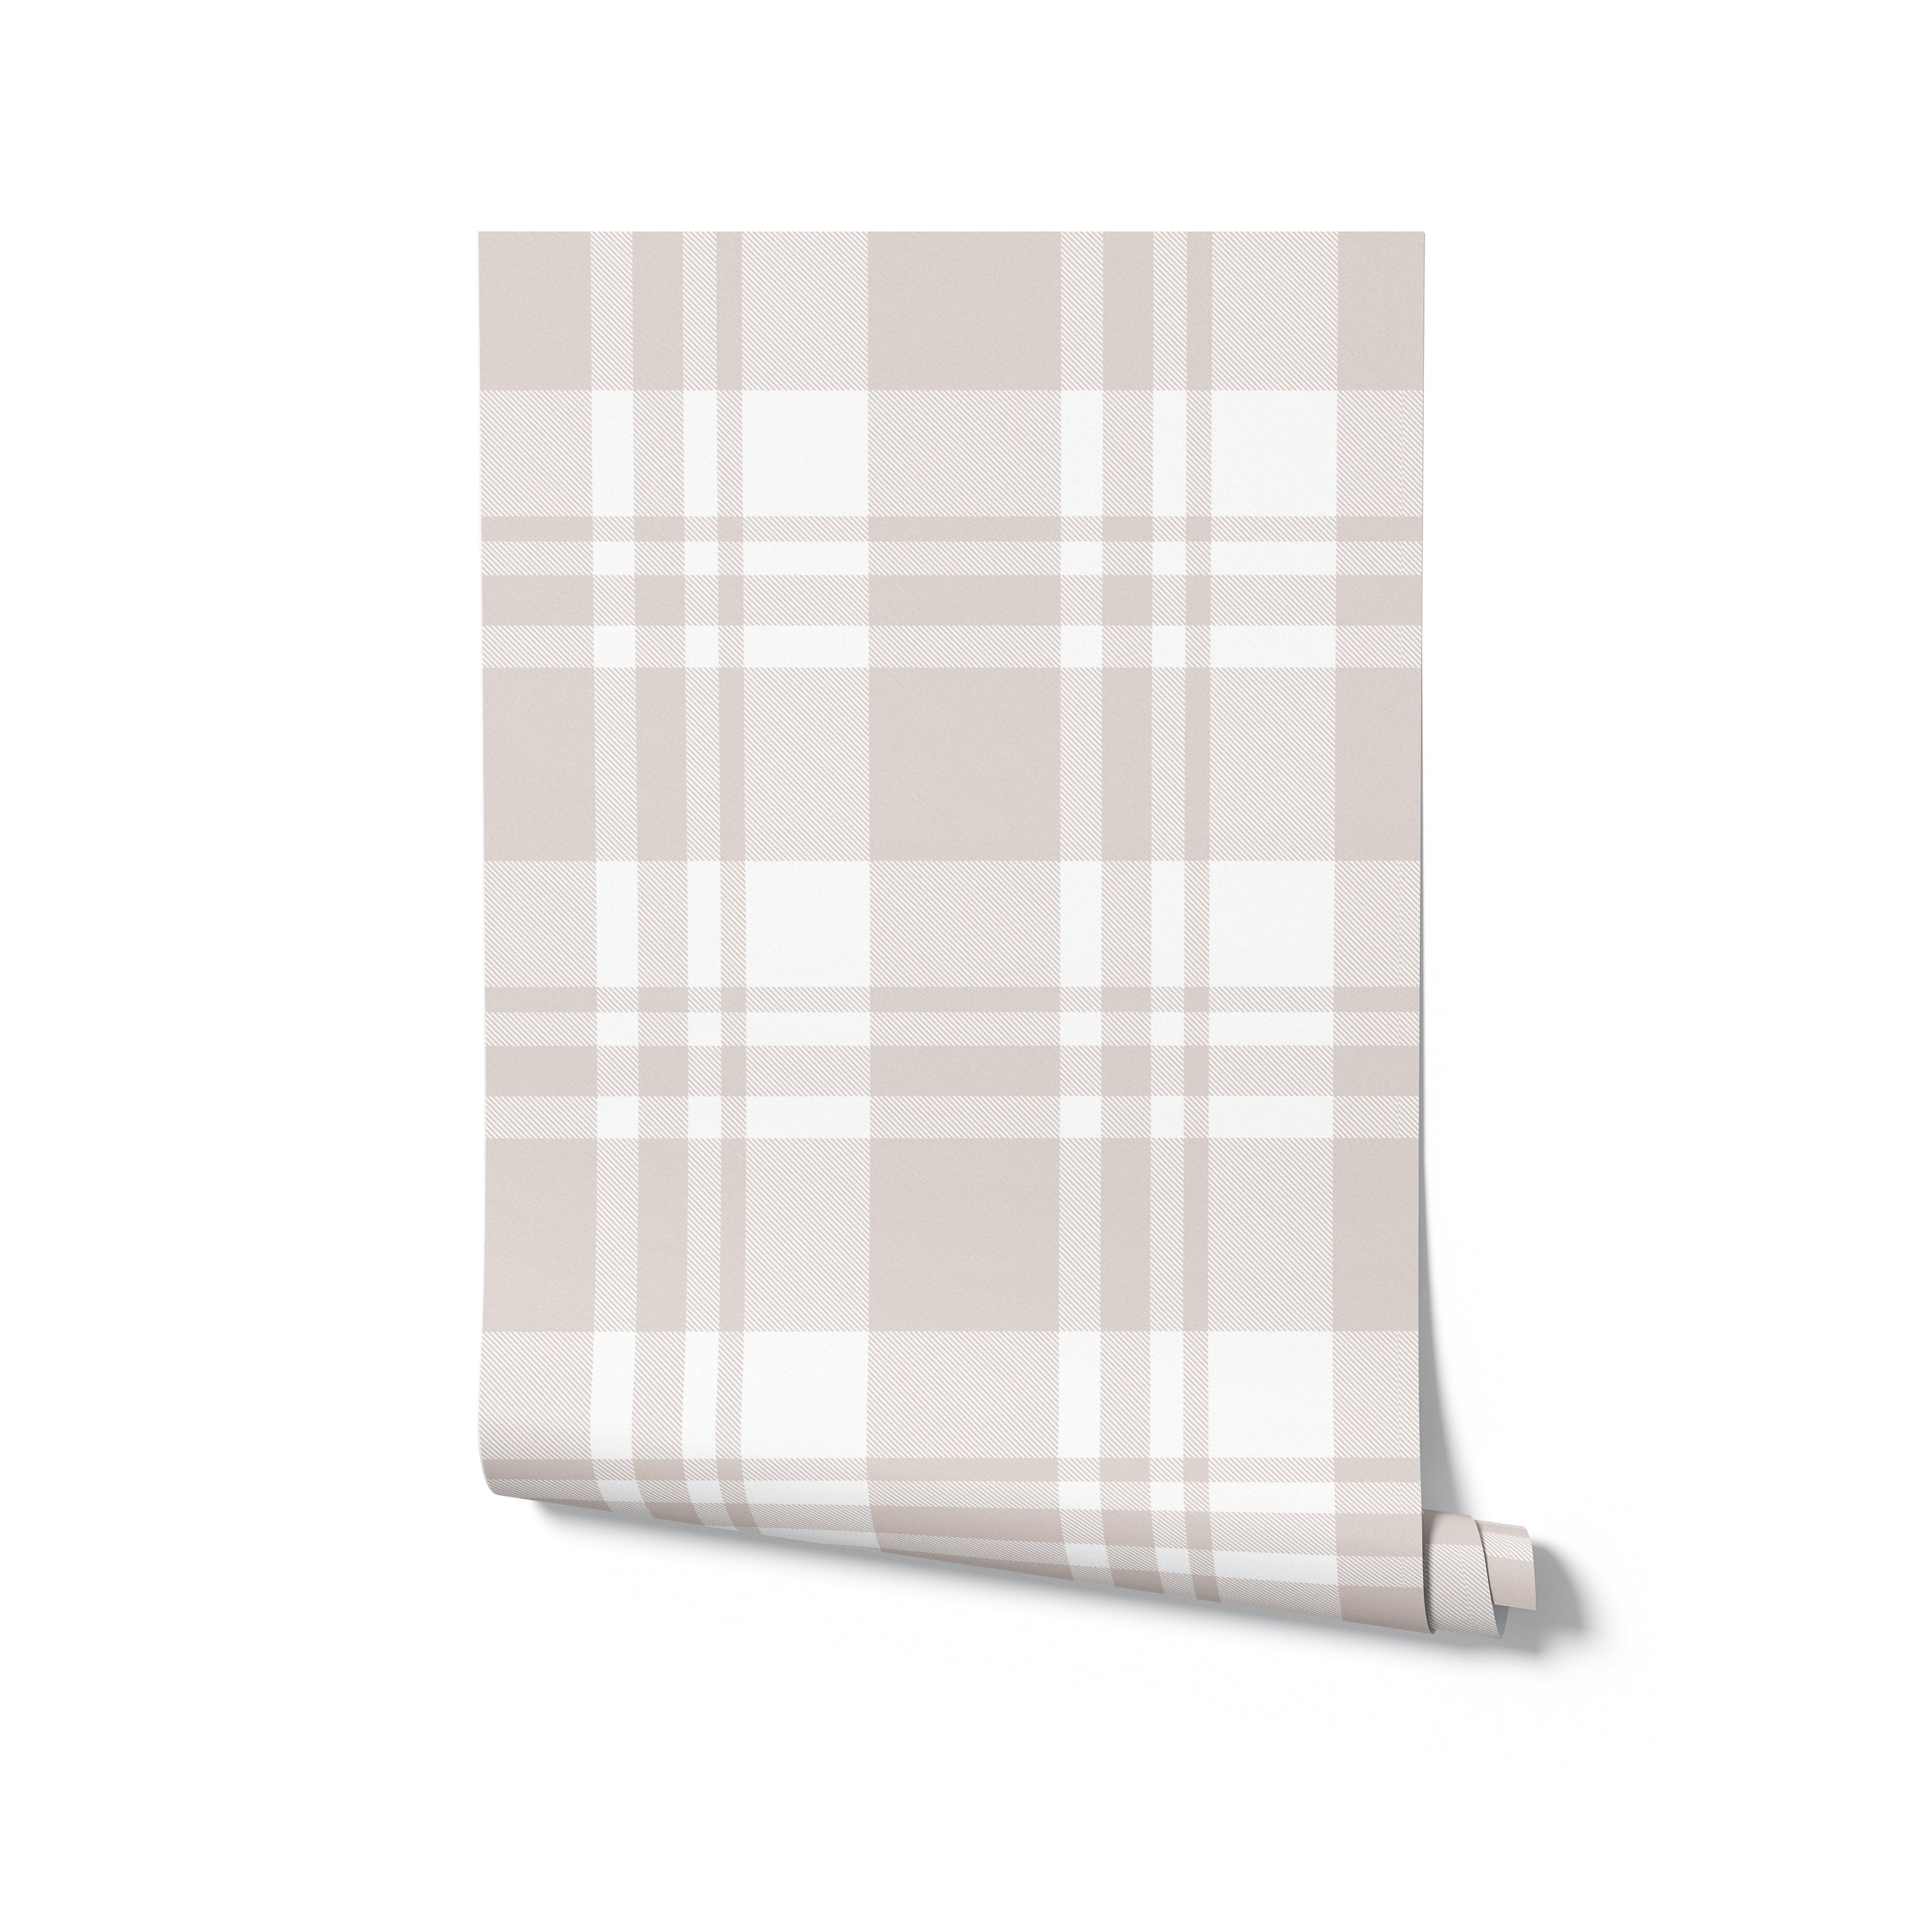 An image of the Plaid Wallpaper - Linen partially rolled up, showcasing the classic plaid design in linen and soft beige. The roll suggests the product's ready-to-use format, inviting thoughts of easy application and transformation of living spaces with its homely and traditional plaid pattern.